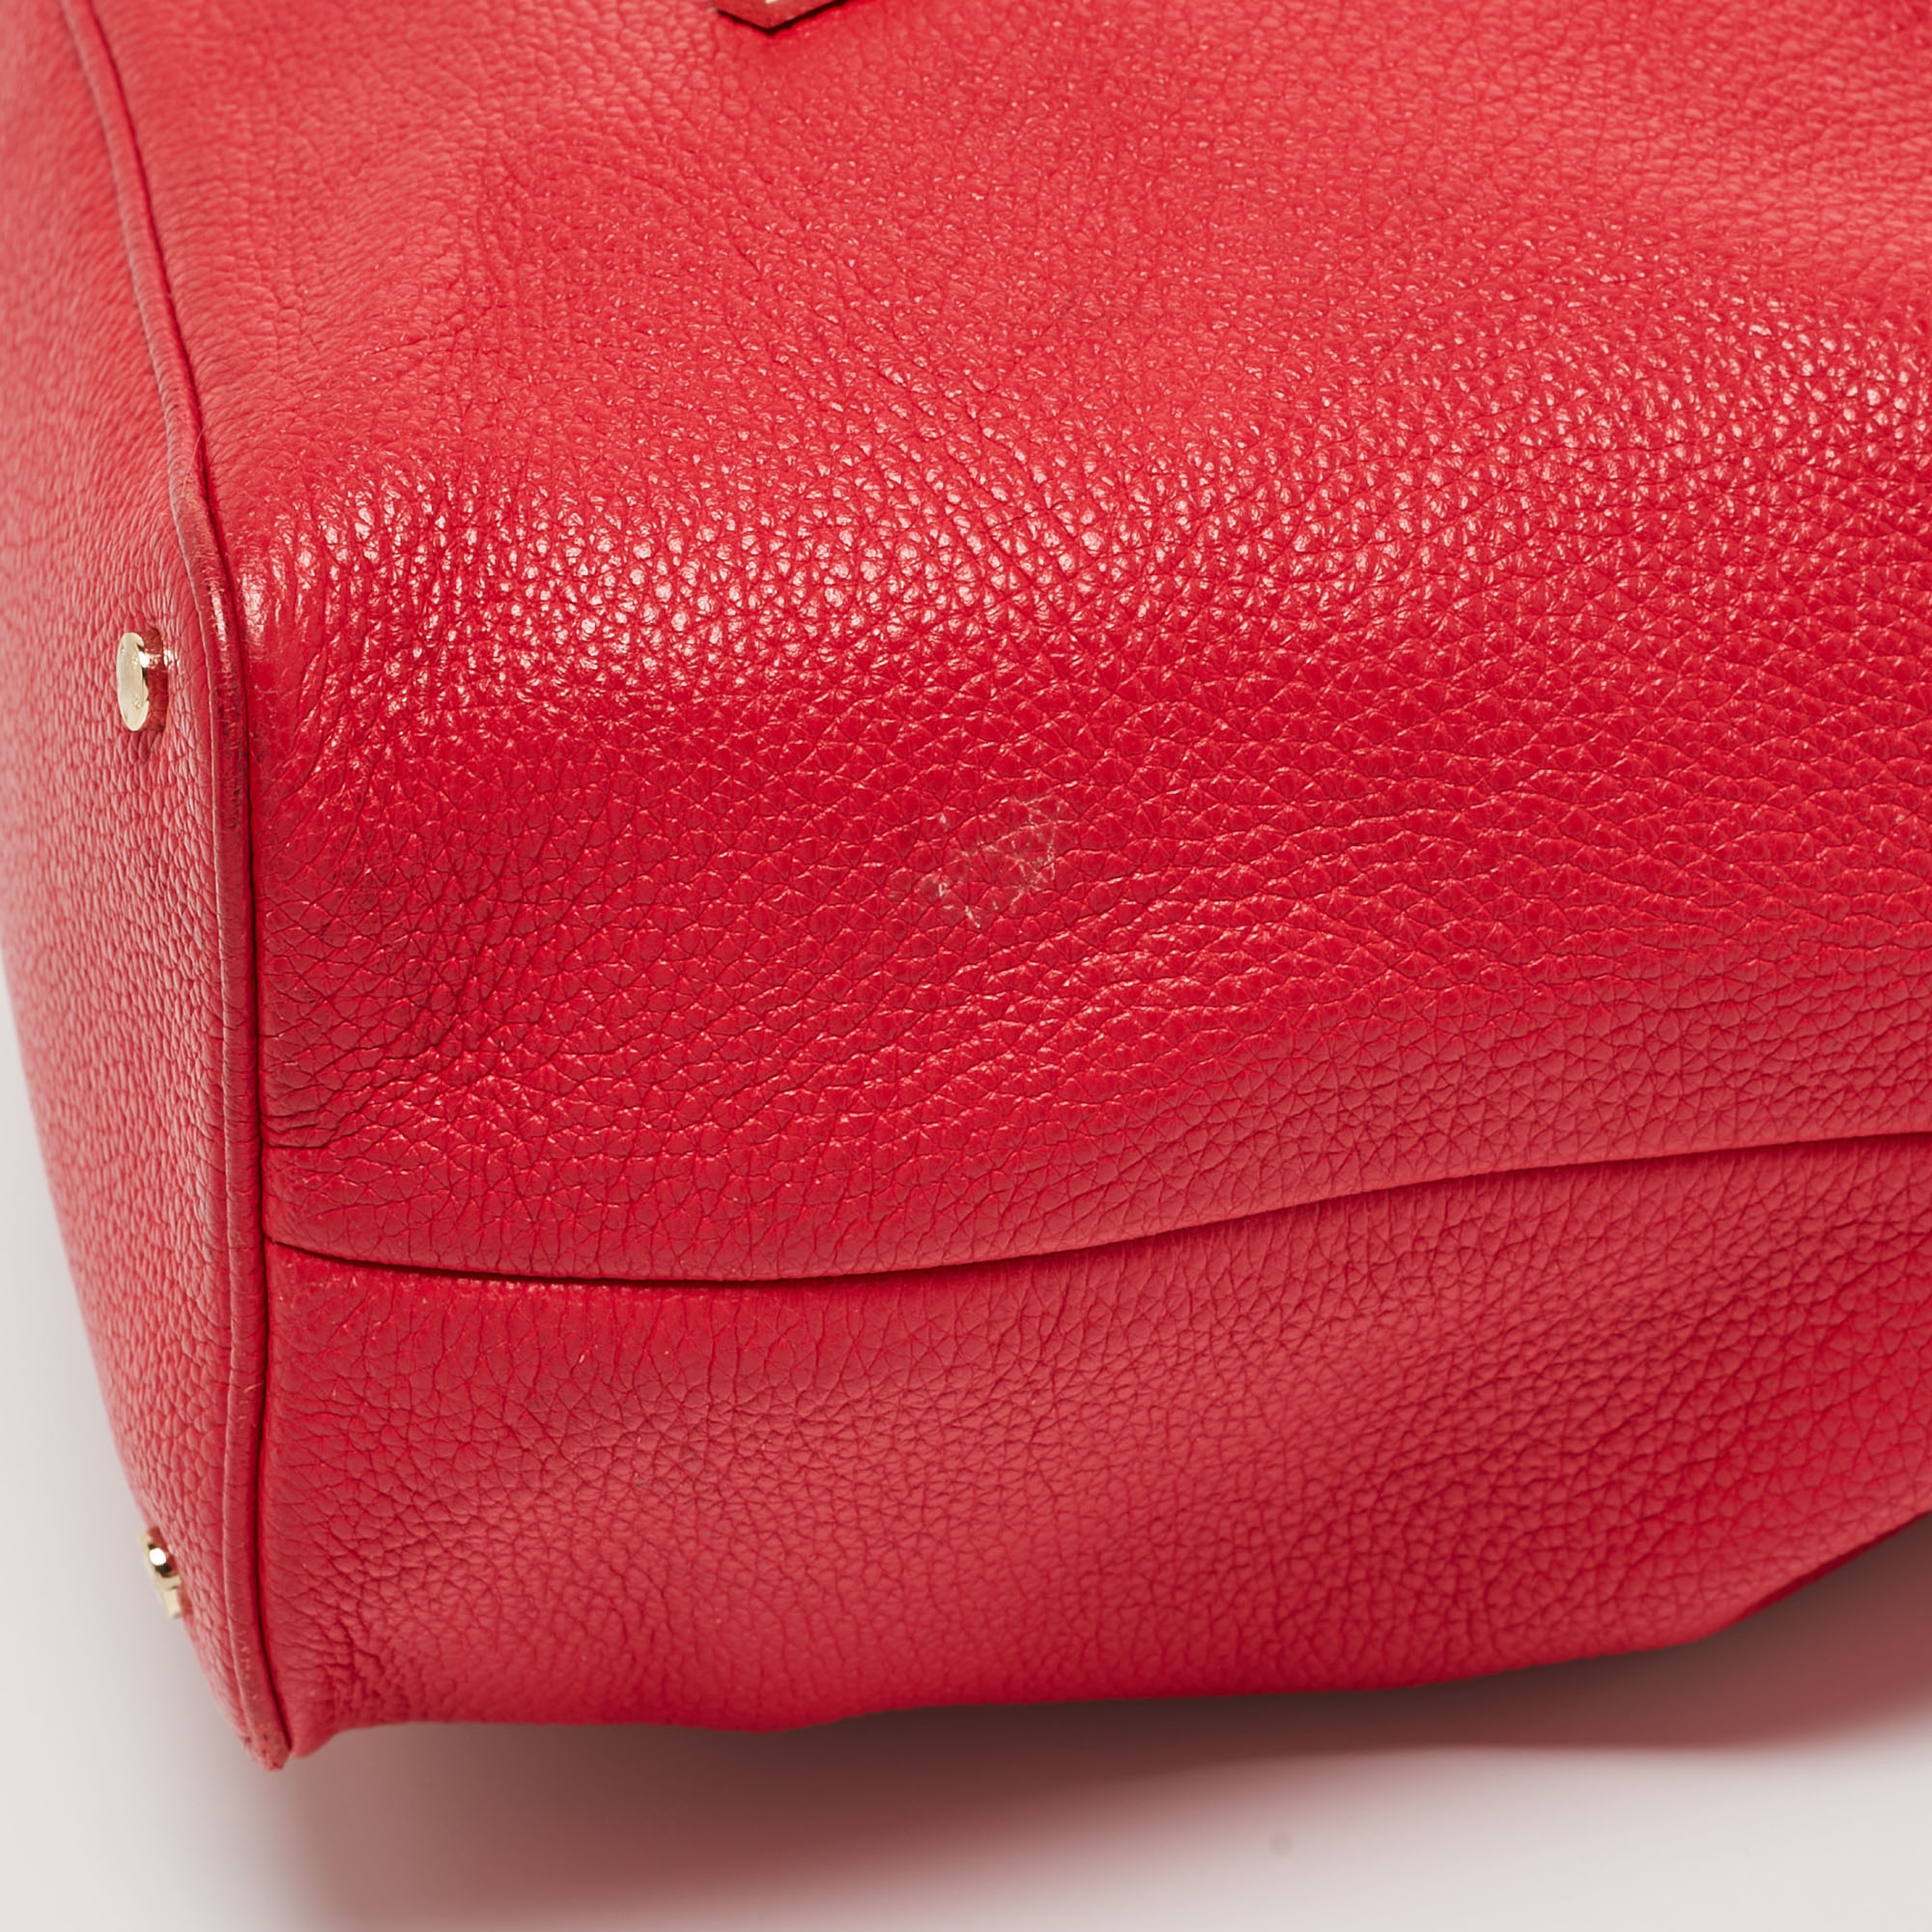 Aigner Red Leather Drawstring Tote